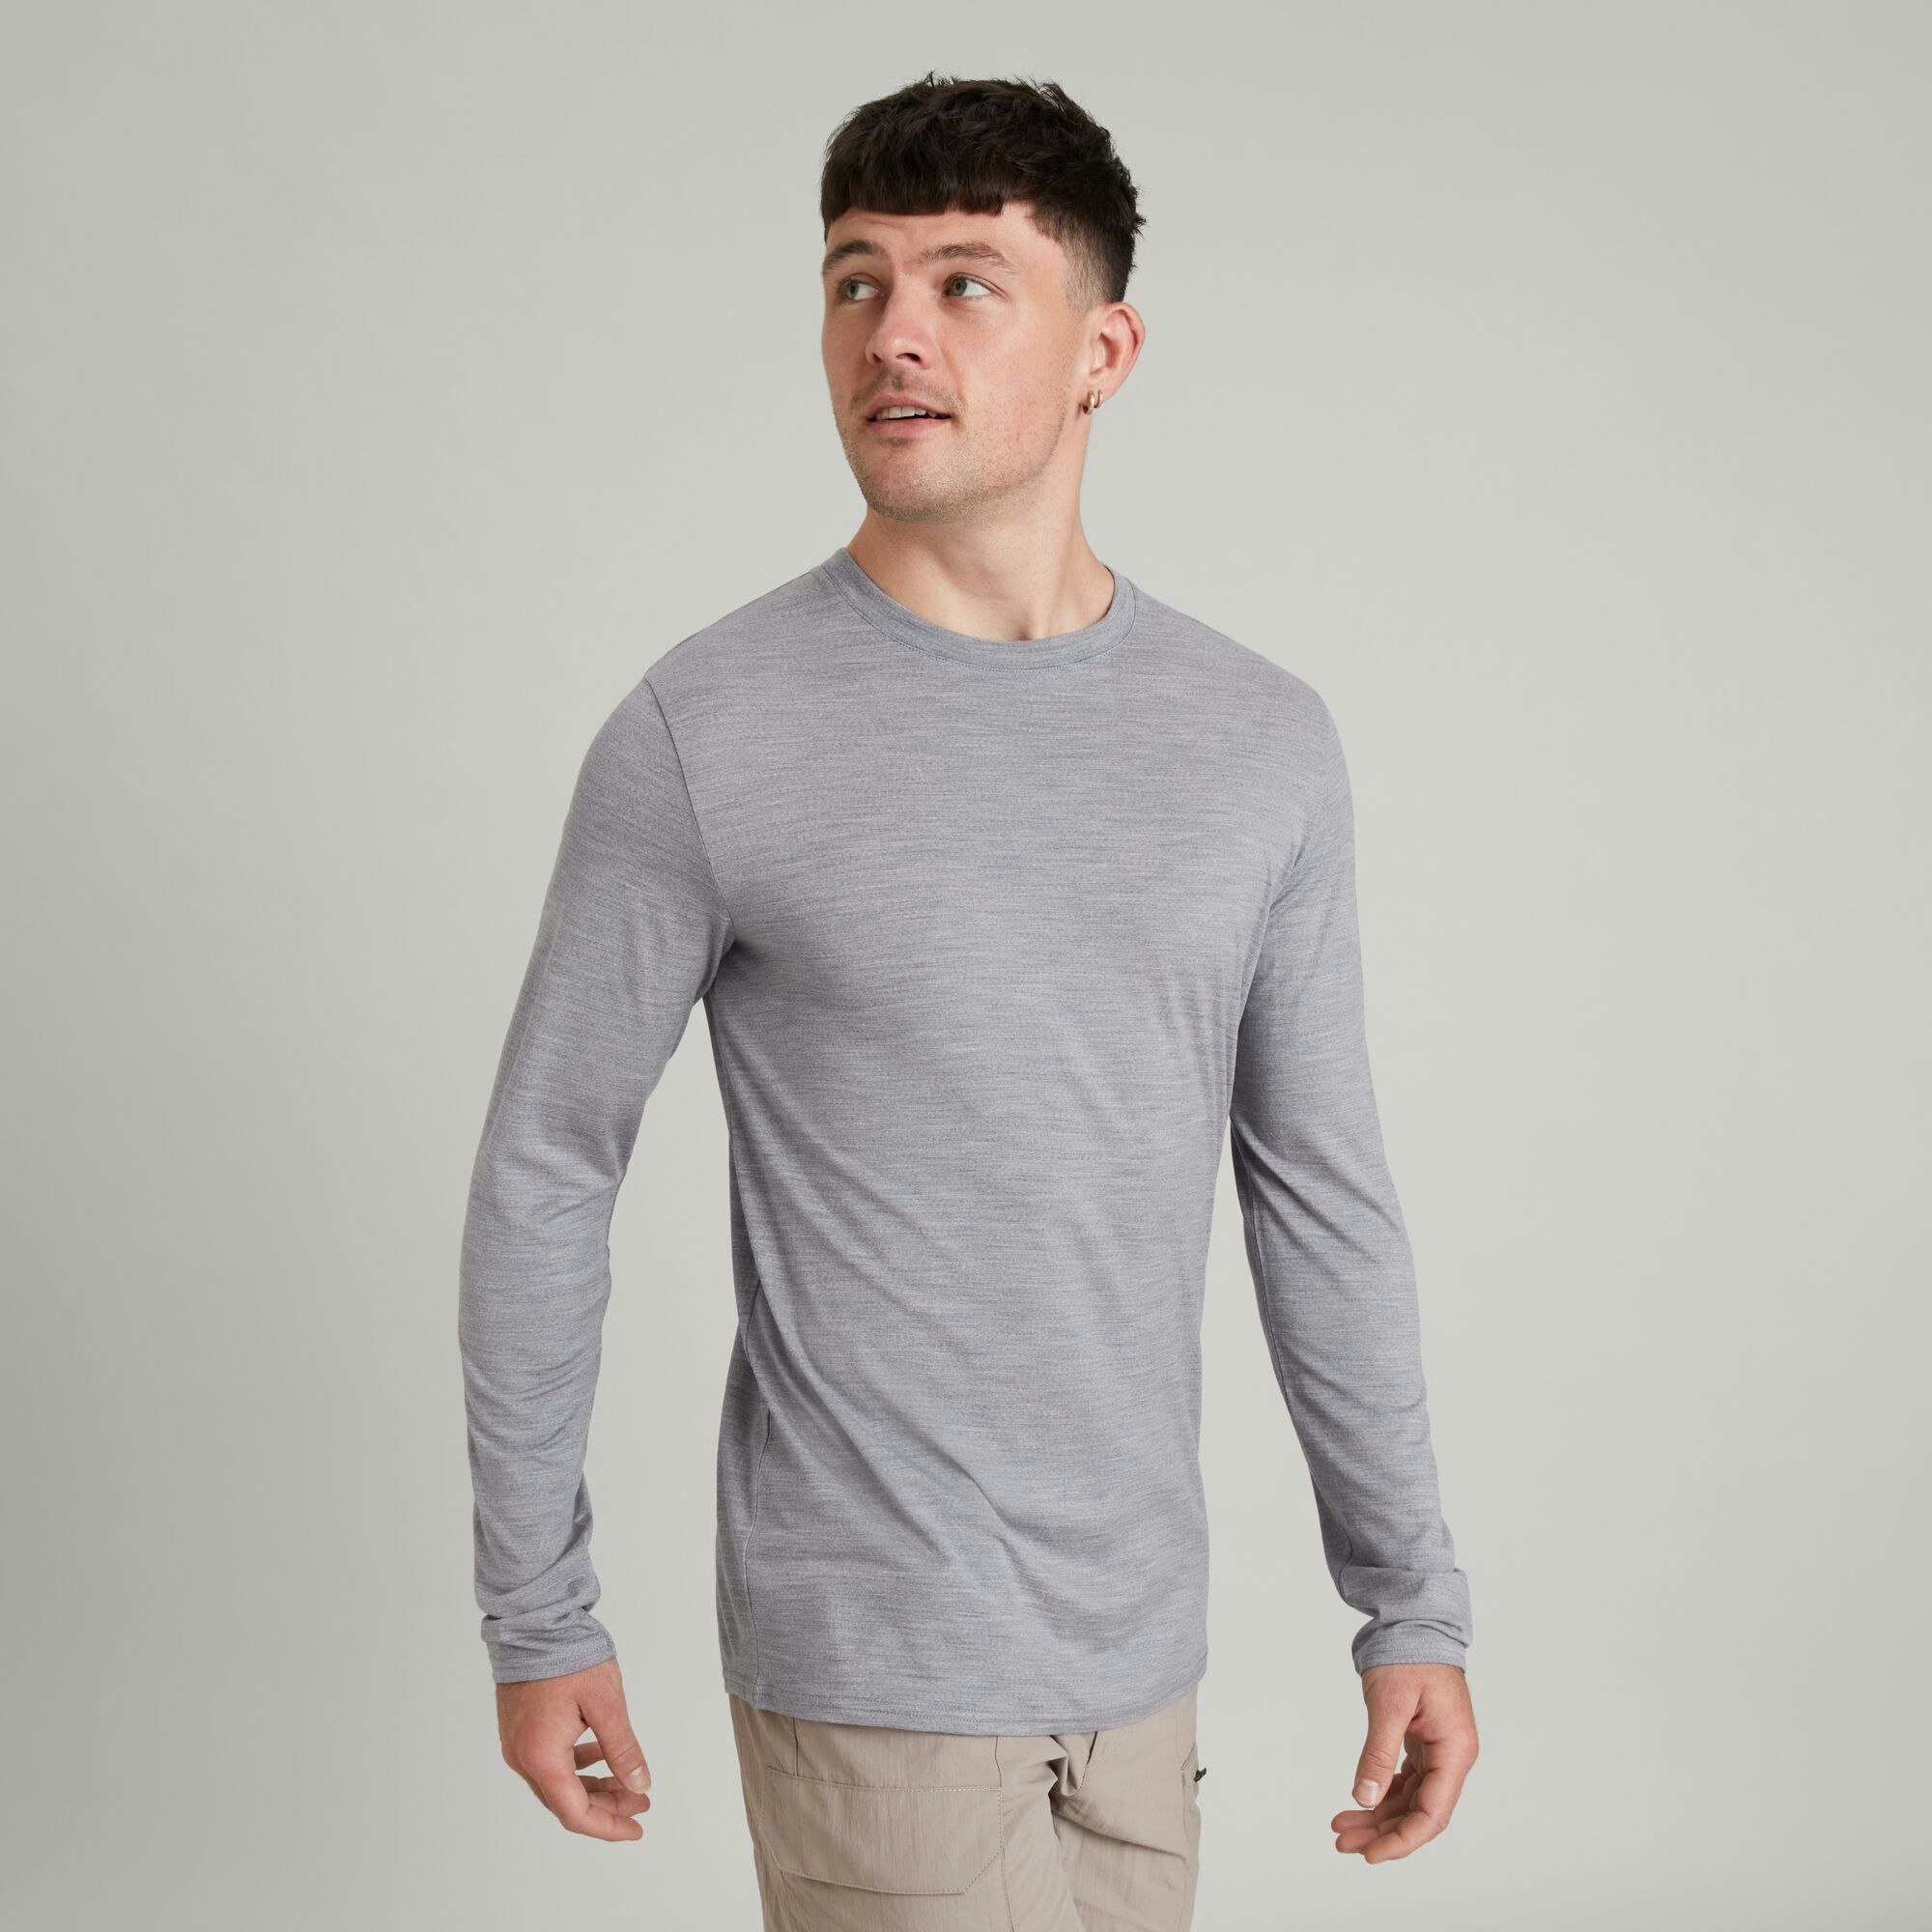 Merino Wool Base Layer Thermal Wear For Men For Men Long Sleeve 240G  Midweight Top With Wicking And Breathable Fabric Ideal For Hiking 231122  From Powerstore02, $38.37